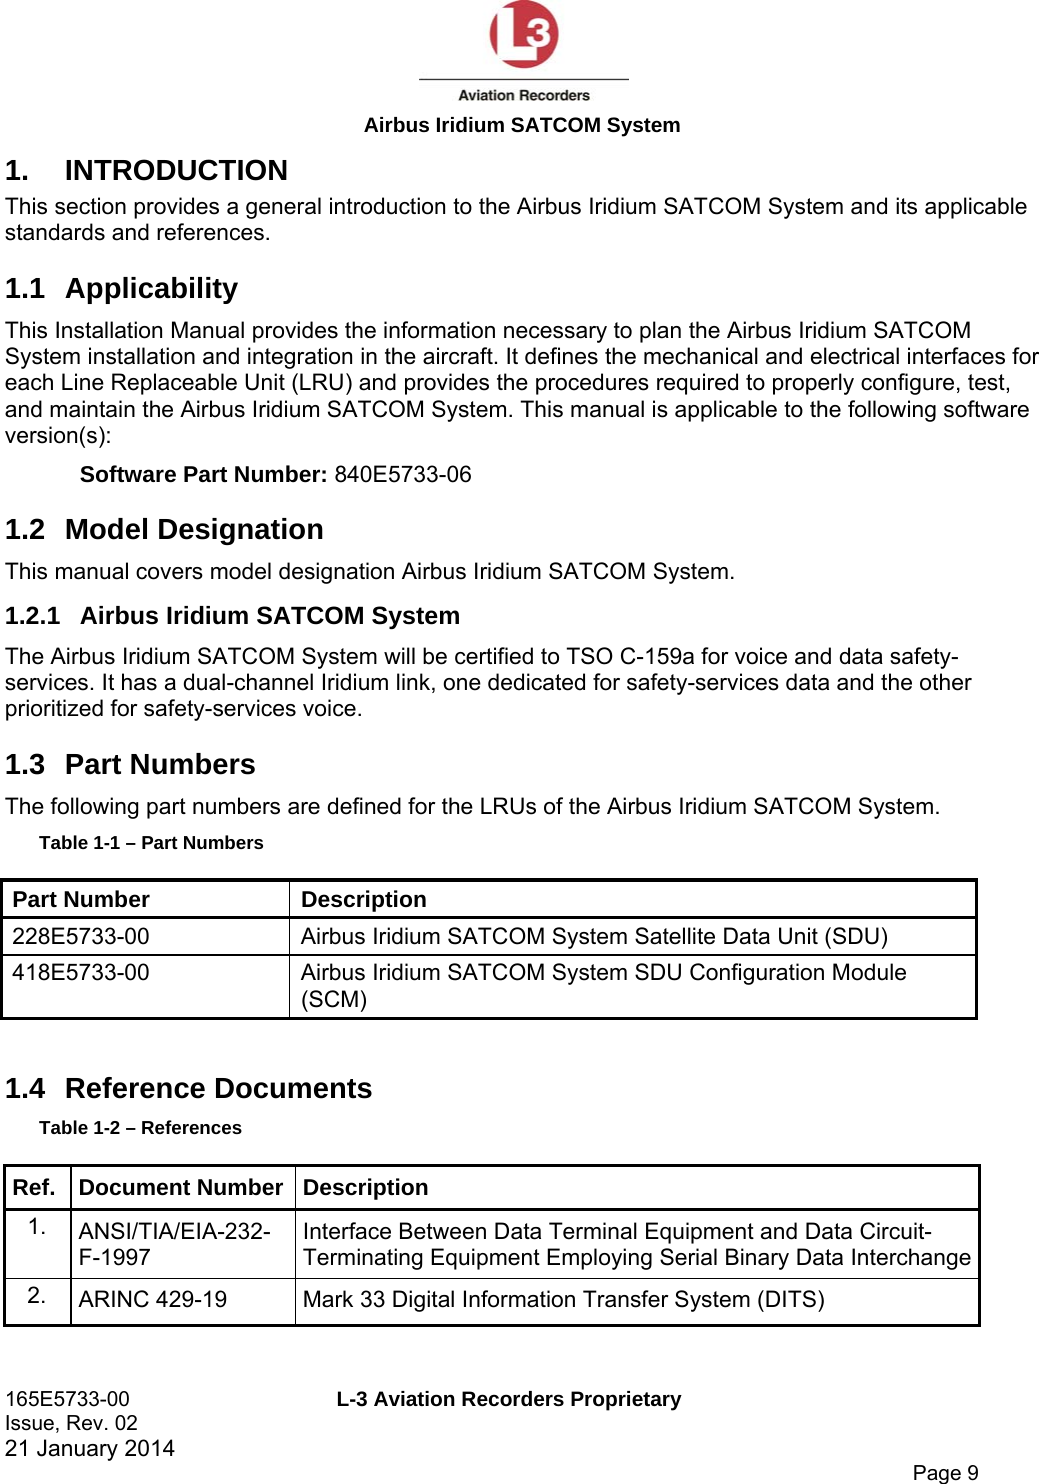  Airbus Iridium SATCOM System 165E5733-00  L-3 Aviation Recorders Proprietary Issue, Rev. 02   21 January 2014      Page 9 1. INTRODUCTION This section provides a general introduction to the Airbus Iridium SATCOM System and its applicable standards and references.  1.1 Applicability This Installation Manual provides the information necessary to plan the Airbus Iridium SATCOM System installation and integration in the aircraft. It defines the mechanical and electrical interfaces for each Line Replaceable Unit (LRU) and provides the procedures required to properly configure, test, and maintain the Airbus Iridium SATCOM System. This manual is applicable to the following software version(s): Software Part Number: 840E5733-06 1.2 Model Designation This manual covers model designation Airbus Iridium SATCOM System. 1.2.1  Airbus Iridium SATCOM System The Airbus Iridium SATCOM System will be certified to TSO C-159a for voice and data safety-services. It has a dual-channel Iridium link, one dedicated for safety-services data and the other prioritized for safety-services voice. 1.3 Part Numbers The following part numbers are defined for the LRUs of the Airbus Iridium SATCOM System. Table 1-1 – Part Numbers Part Number  Description 228E5733-00  Airbus Iridium SATCOM System Satellite Data Unit (SDU) 418E5733-00  Airbus Iridium SATCOM System SDU Configuration Module (SCM)  1.4 Reference Documents Table 1-2 – References Ref. Document Number Description 1.  ANSI/TIA/EIA-232-F-1997 Interface Between Data Terminal Equipment and Data Circuit-Terminating Equipment Employing Serial Binary Data Interchange2.  ARINC 429-19  Mark 33 Digital Information Transfer System (DITS) 